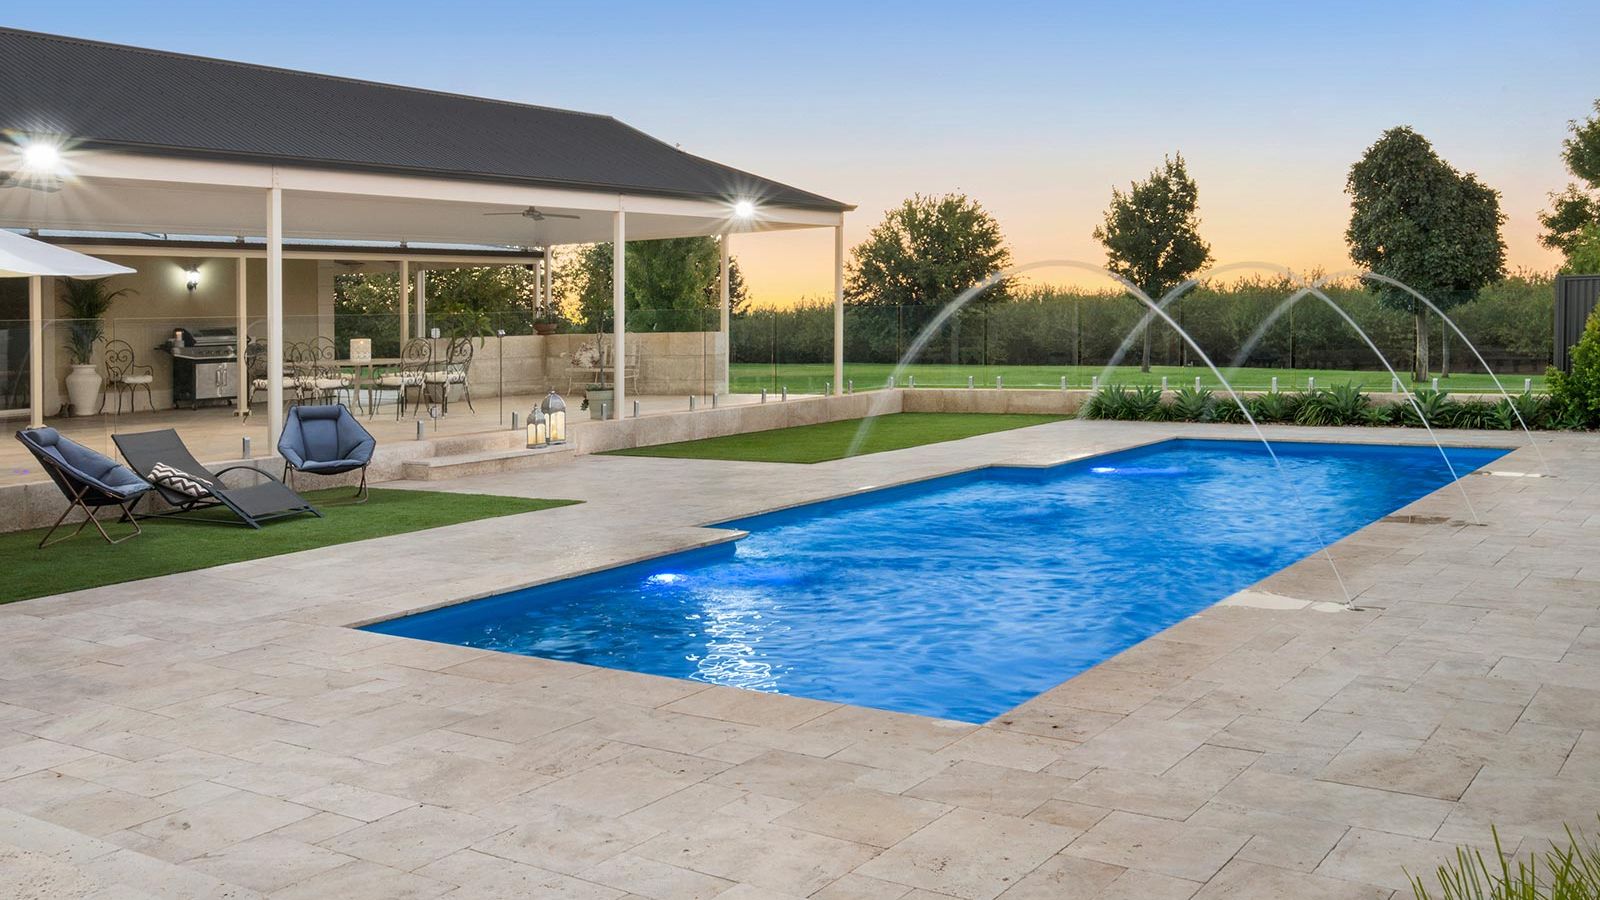 Residential premium fibreglass specialty rectangular pools. Servicing the Central Coast, Newcastle, Lake Macquarie and Hunter regions.